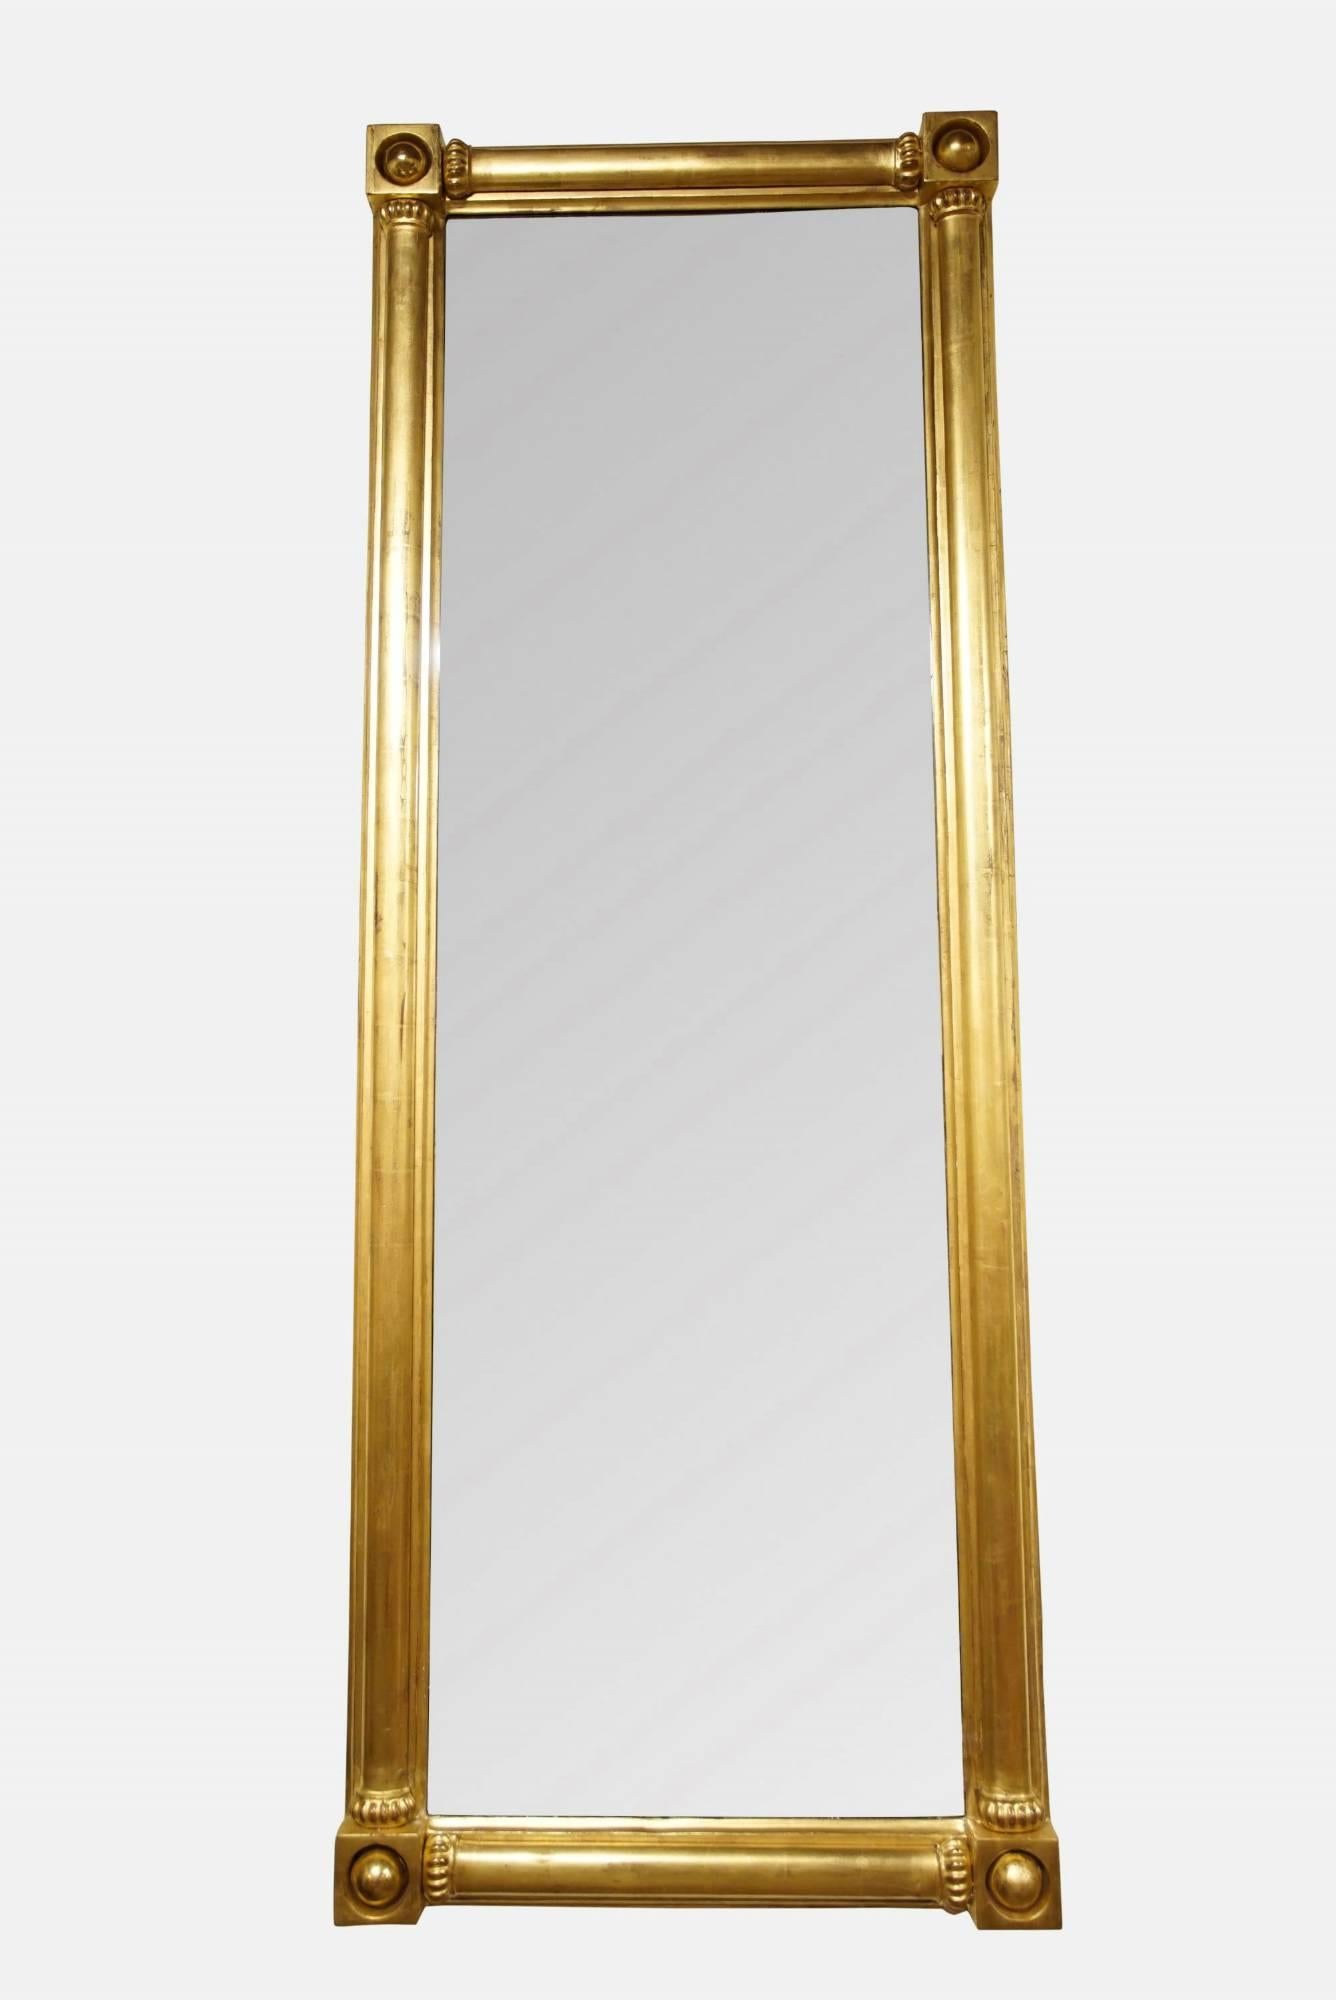 A pair of Regency style gilded pier mirrors with corner ball decorations,

late 20th century.